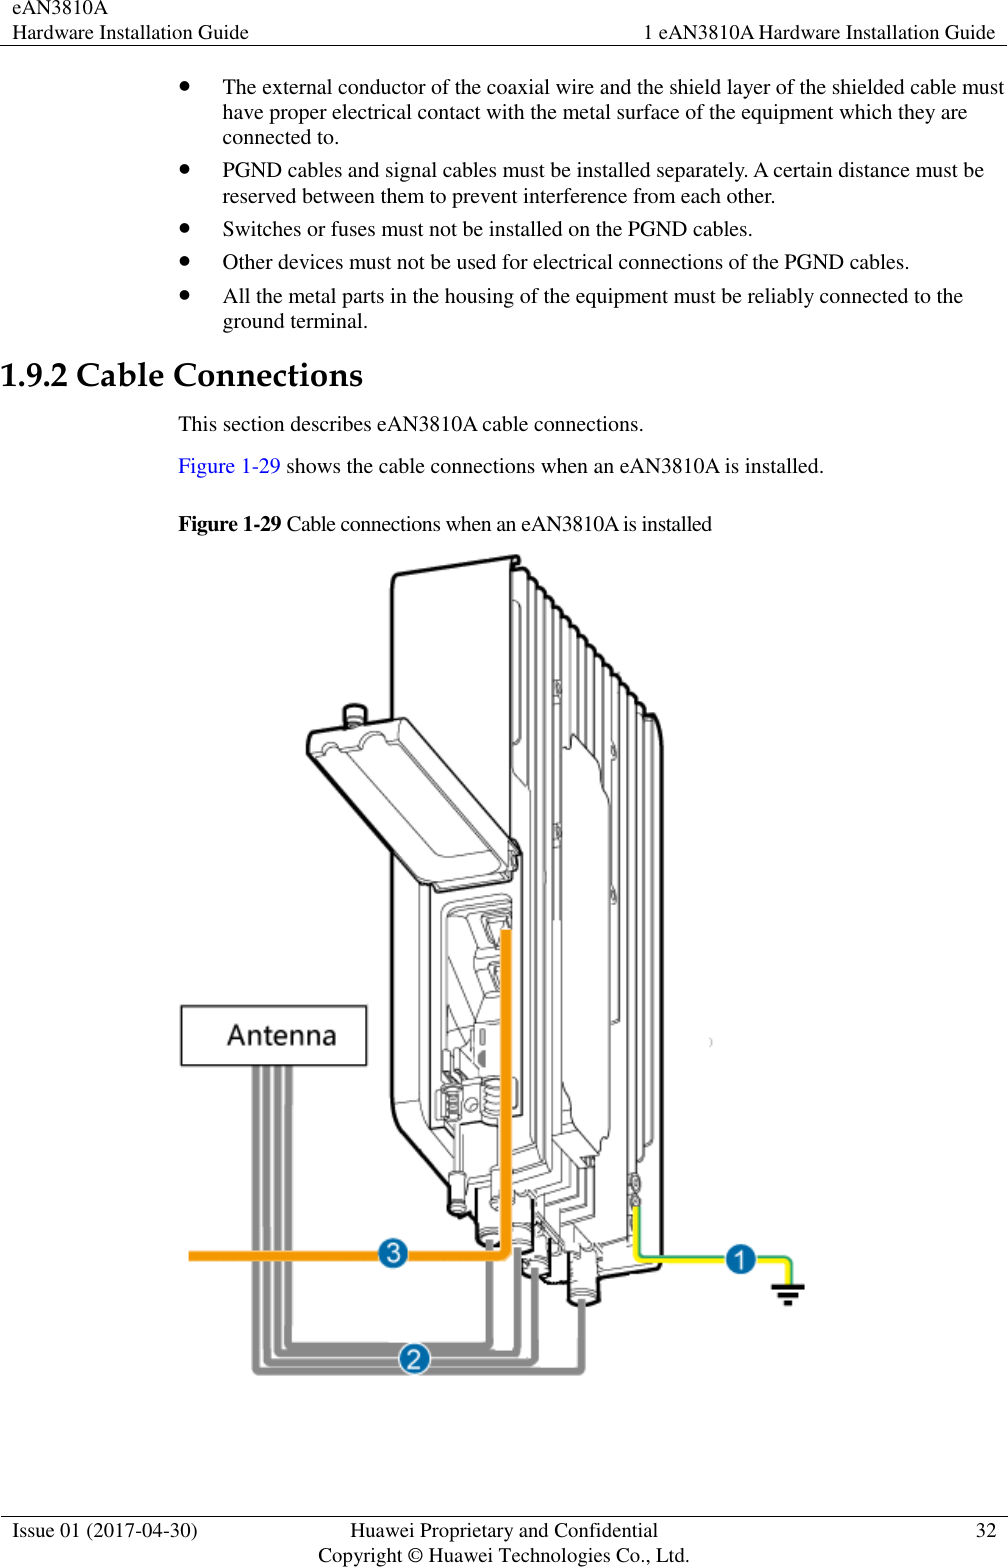 eAN3810A   Hardware Installation Guide 1 eAN3810A Hardware Installation Guide  Issue 01 (2017-04-30) Huawei Proprietary and Confidential                                     Copyright © Huawei Technologies Co., Ltd. 32   The external conductor of the coaxial wire and the shield layer of the shielded cable must have proper electrical contact with the metal surface of the equipment which they are connected to.  PGND cables and signal cables must be installed separately. A certain distance must be reserved between them to prevent interference from each other.  Switches or fuses must not be installed on the PGND cables.  Other devices must not be used for electrical connections of the PGND cables.  All the metal parts in the housing of the equipment must be reliably connected to the ground terminal. 1.9.2 Cable Connections This section describes eAN3810A cable connections. Figure 1-29 shows the cable connections when an eAN3810A is installed. Figure 1-29 Cable connections when an eAN3810A is installed     